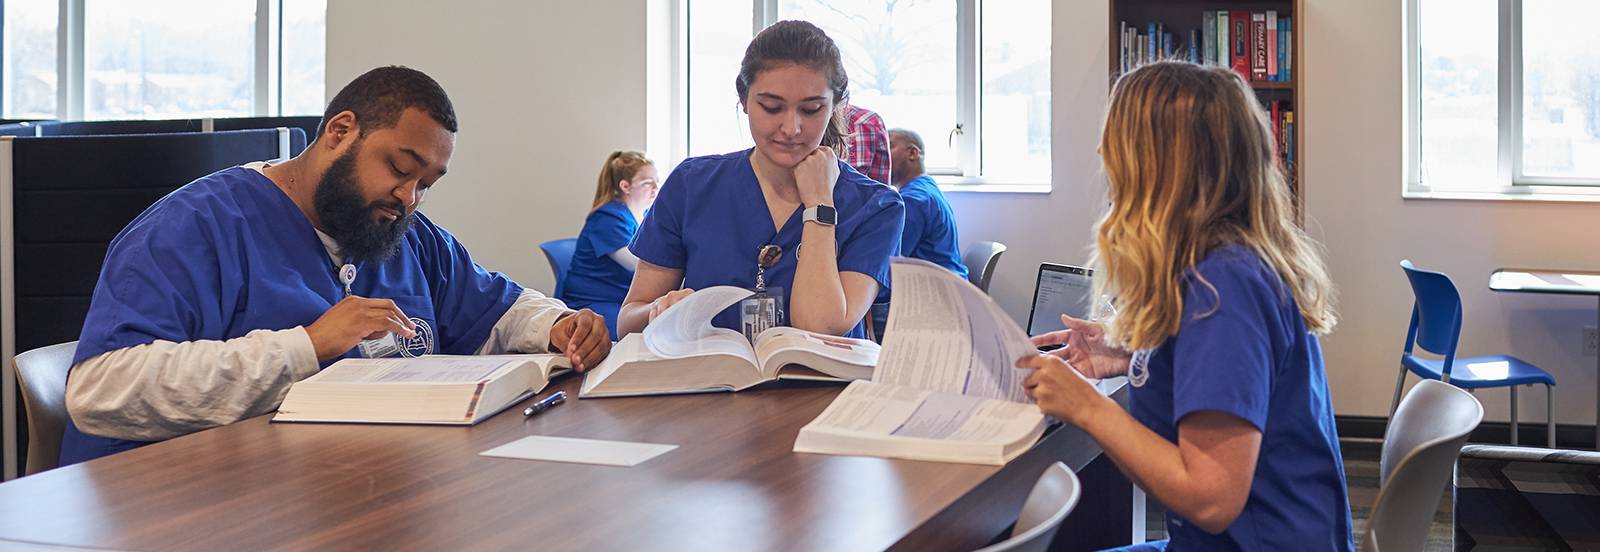 nursing students studying in group